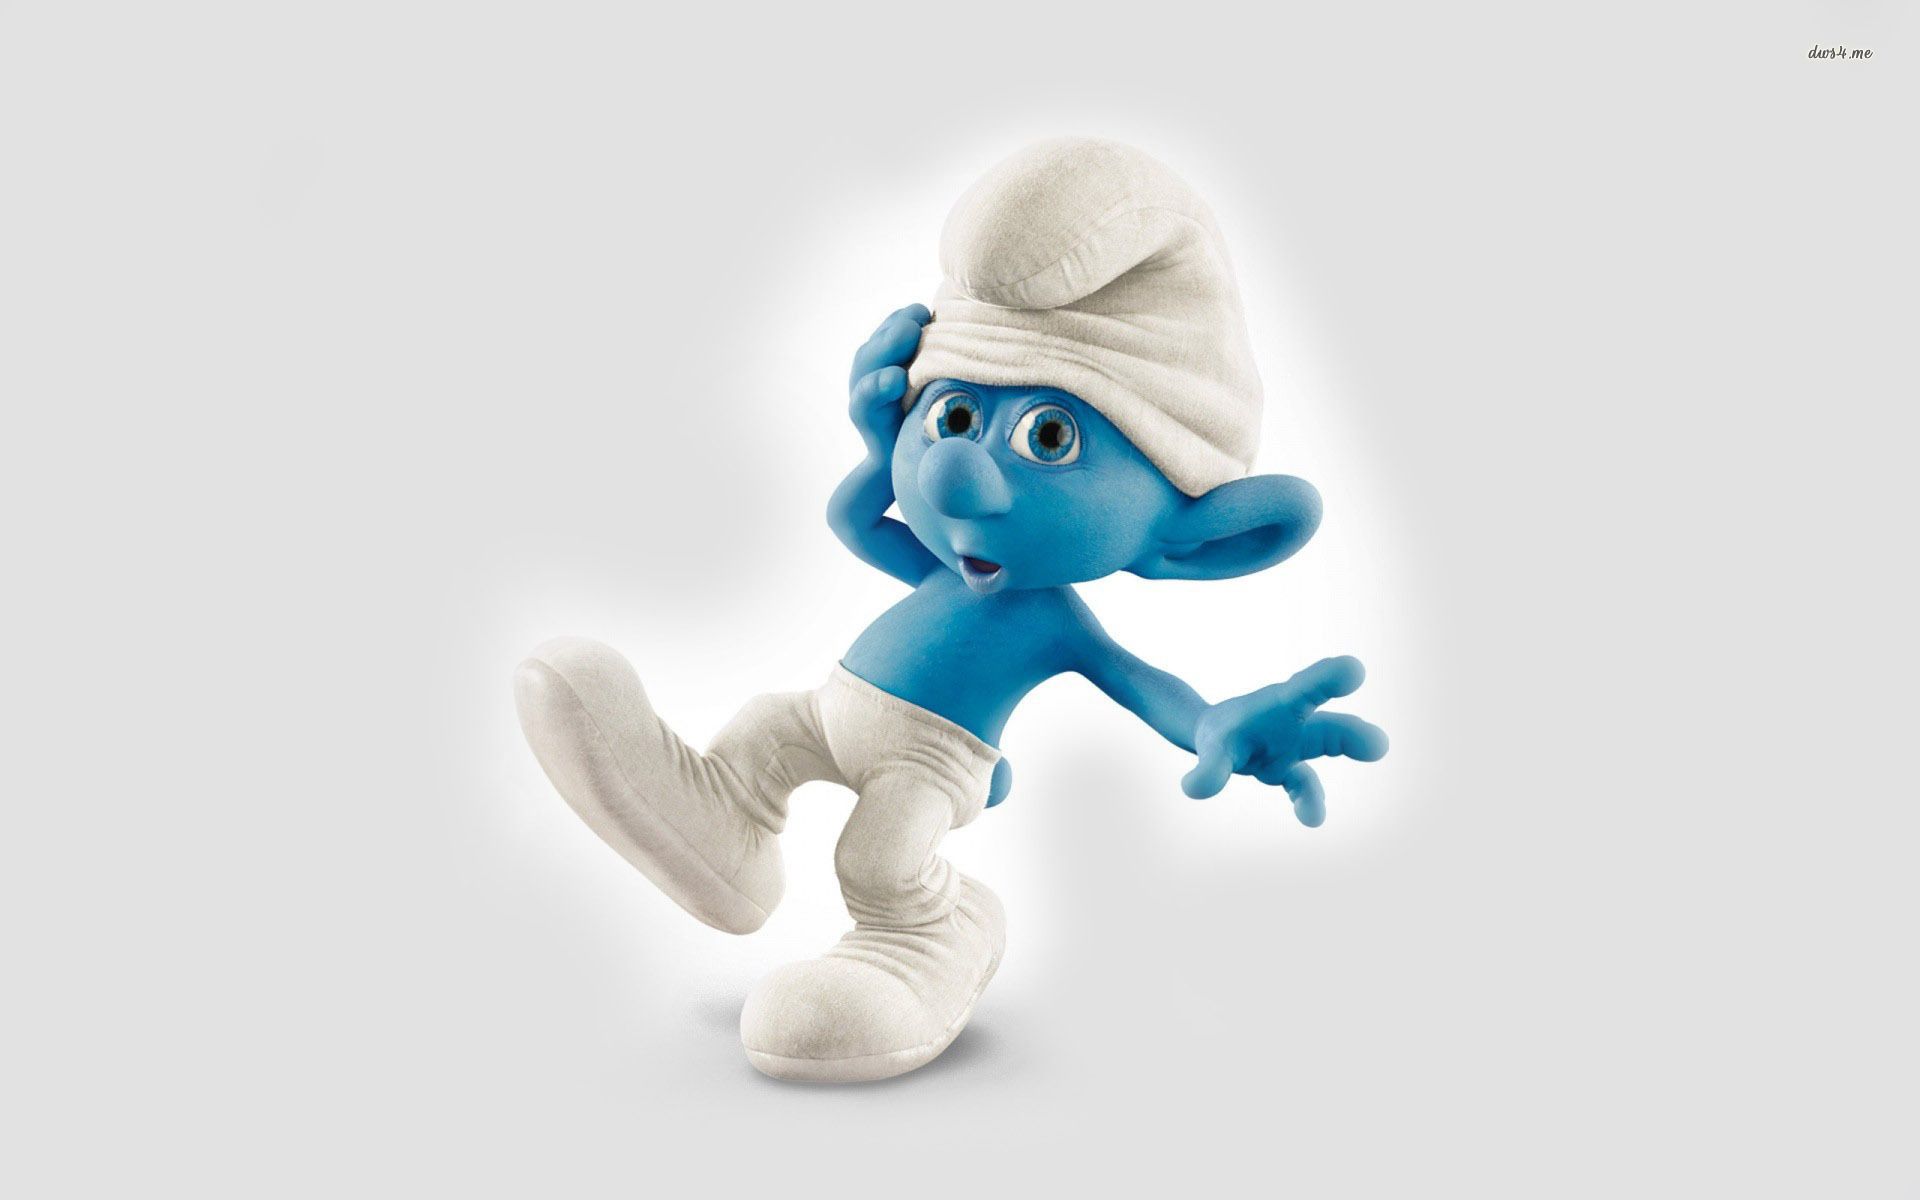 Clumsy - The Smurfs wallpaper - Cartoon wallpapers -